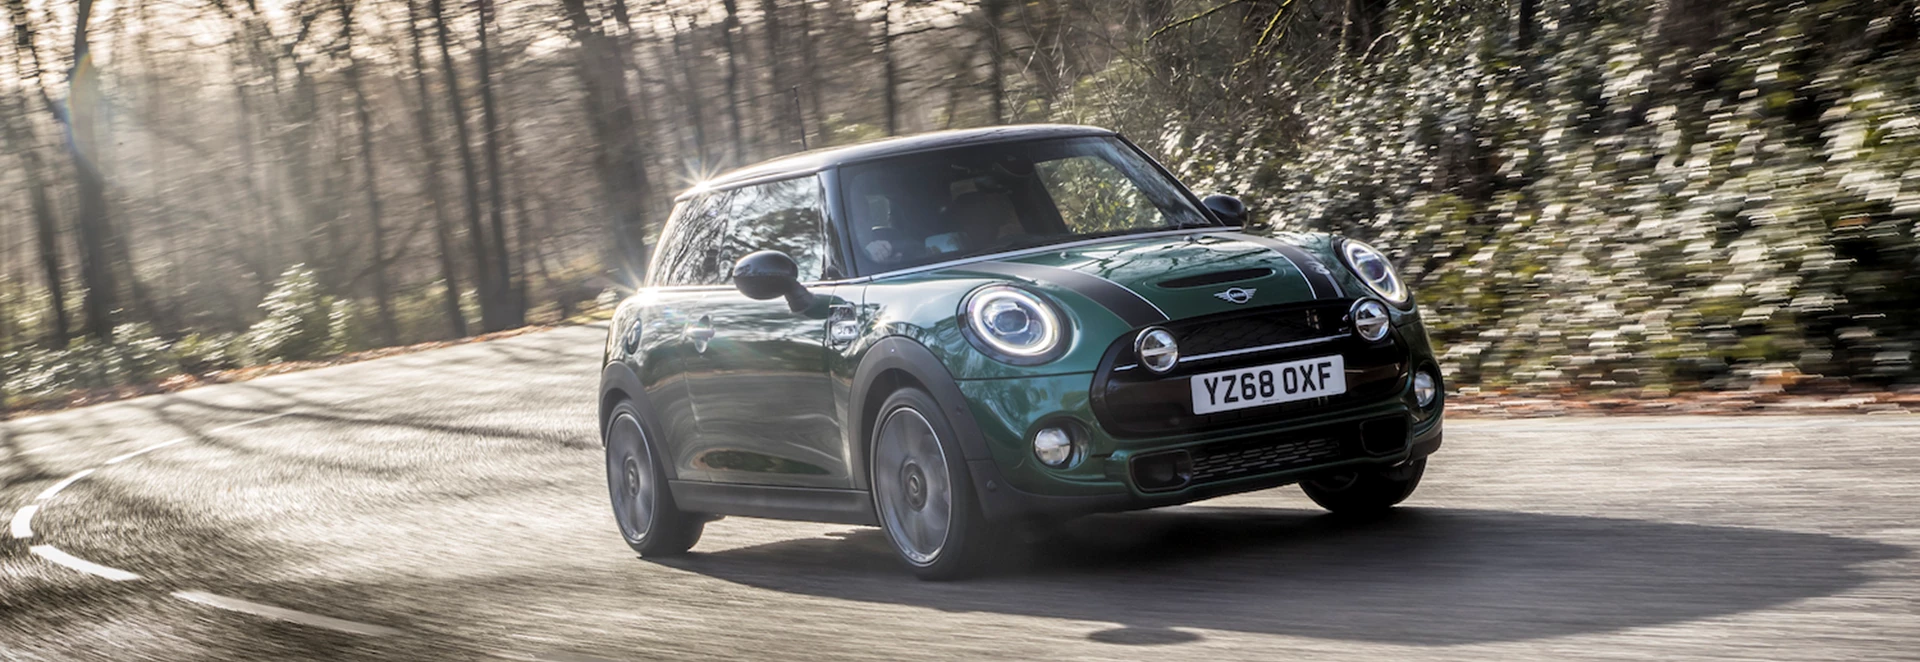 MINI Cooper S 60 Years Edition: The new MINI for your wishlist